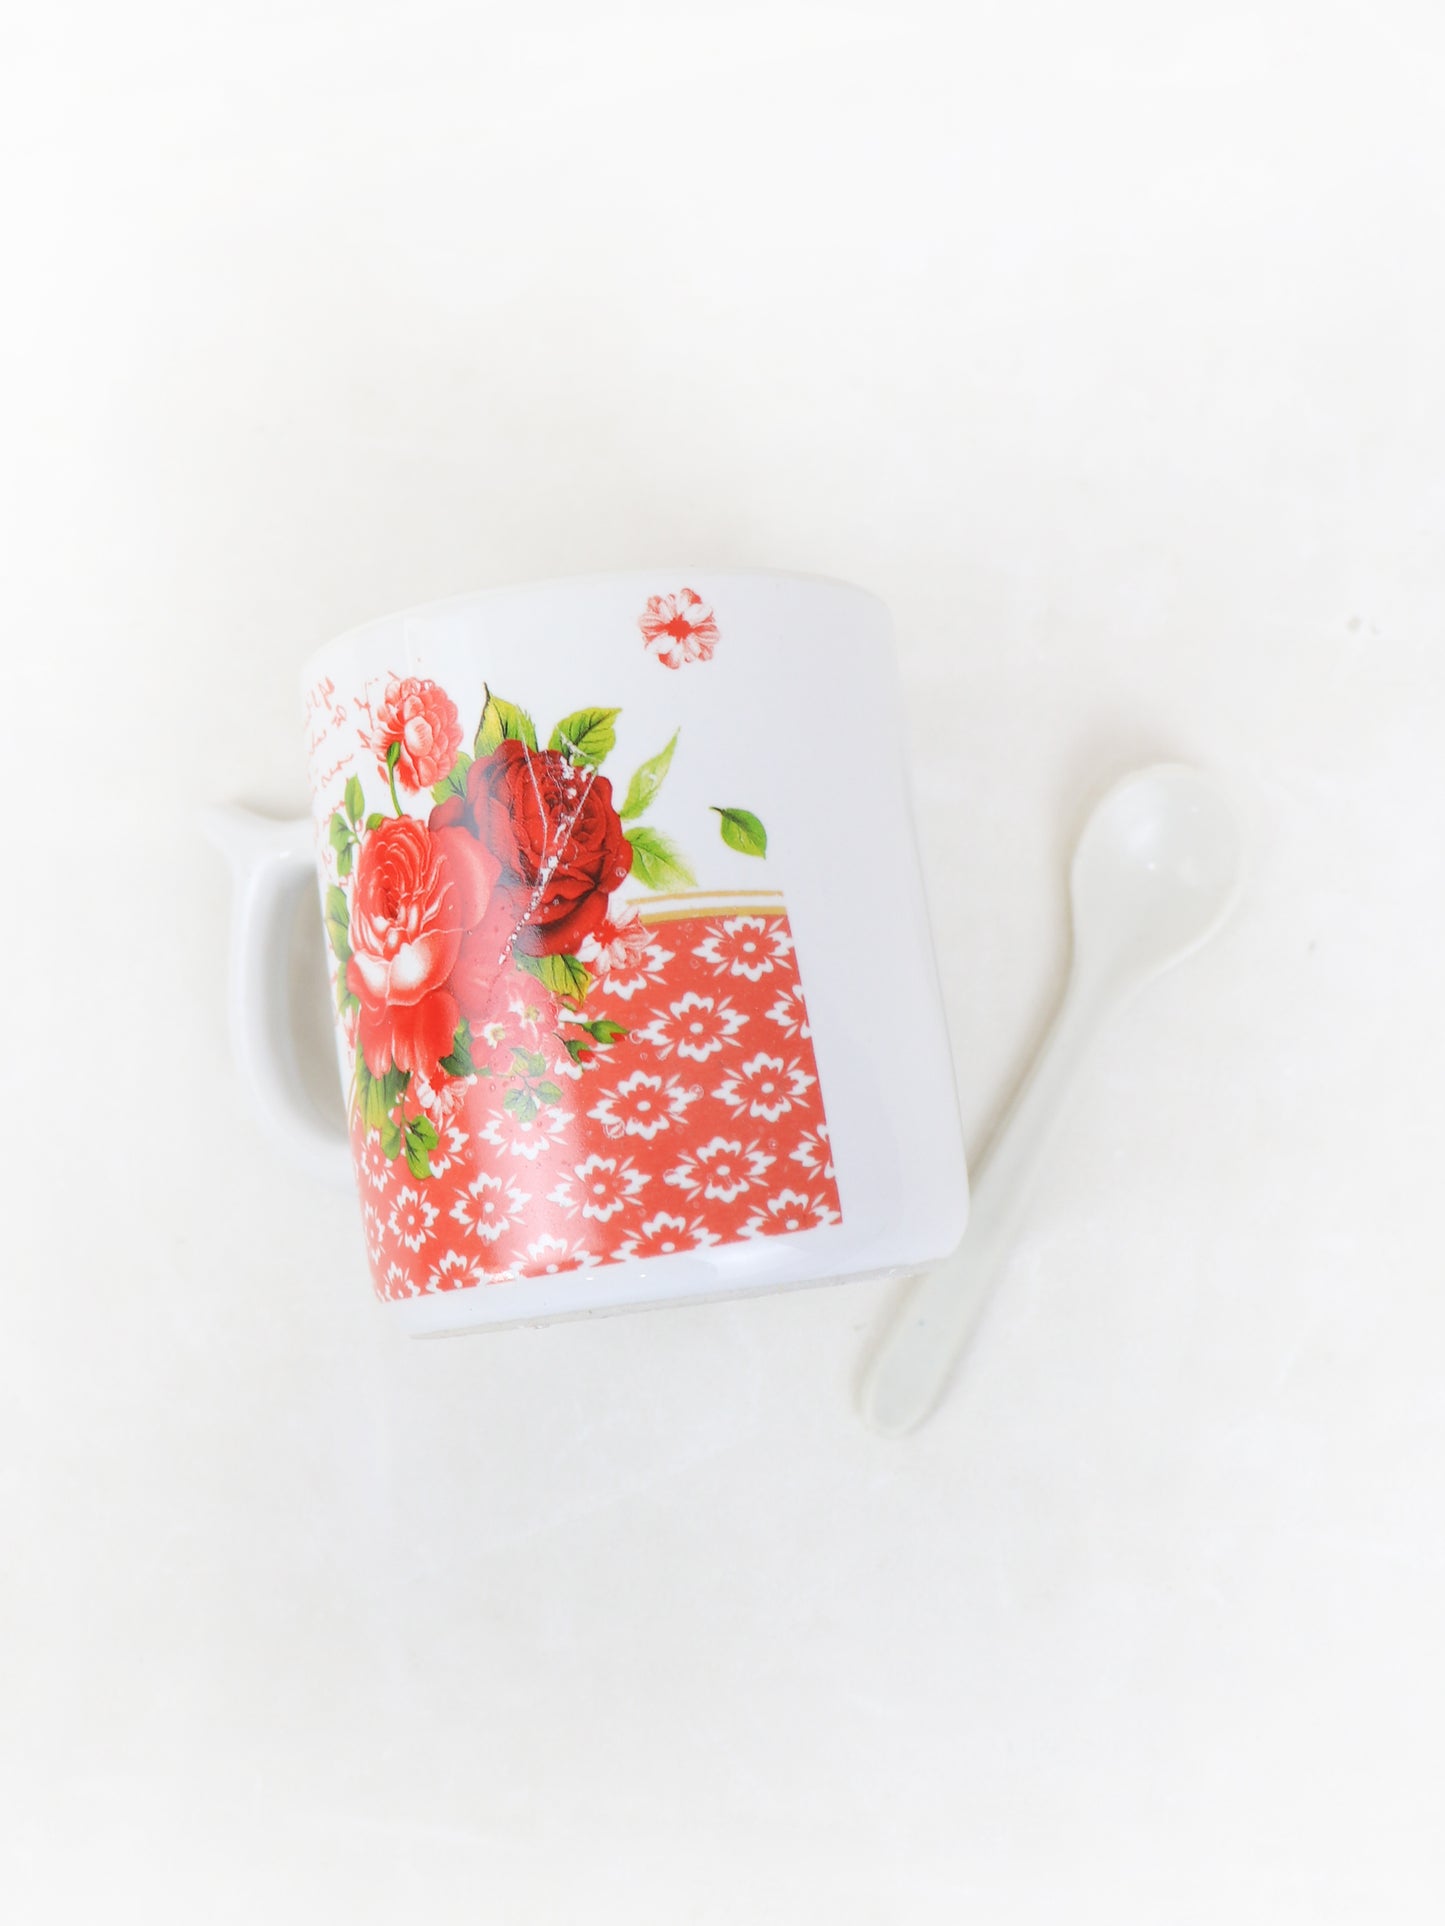 Rose Coffee Cup with Spoon Set Red